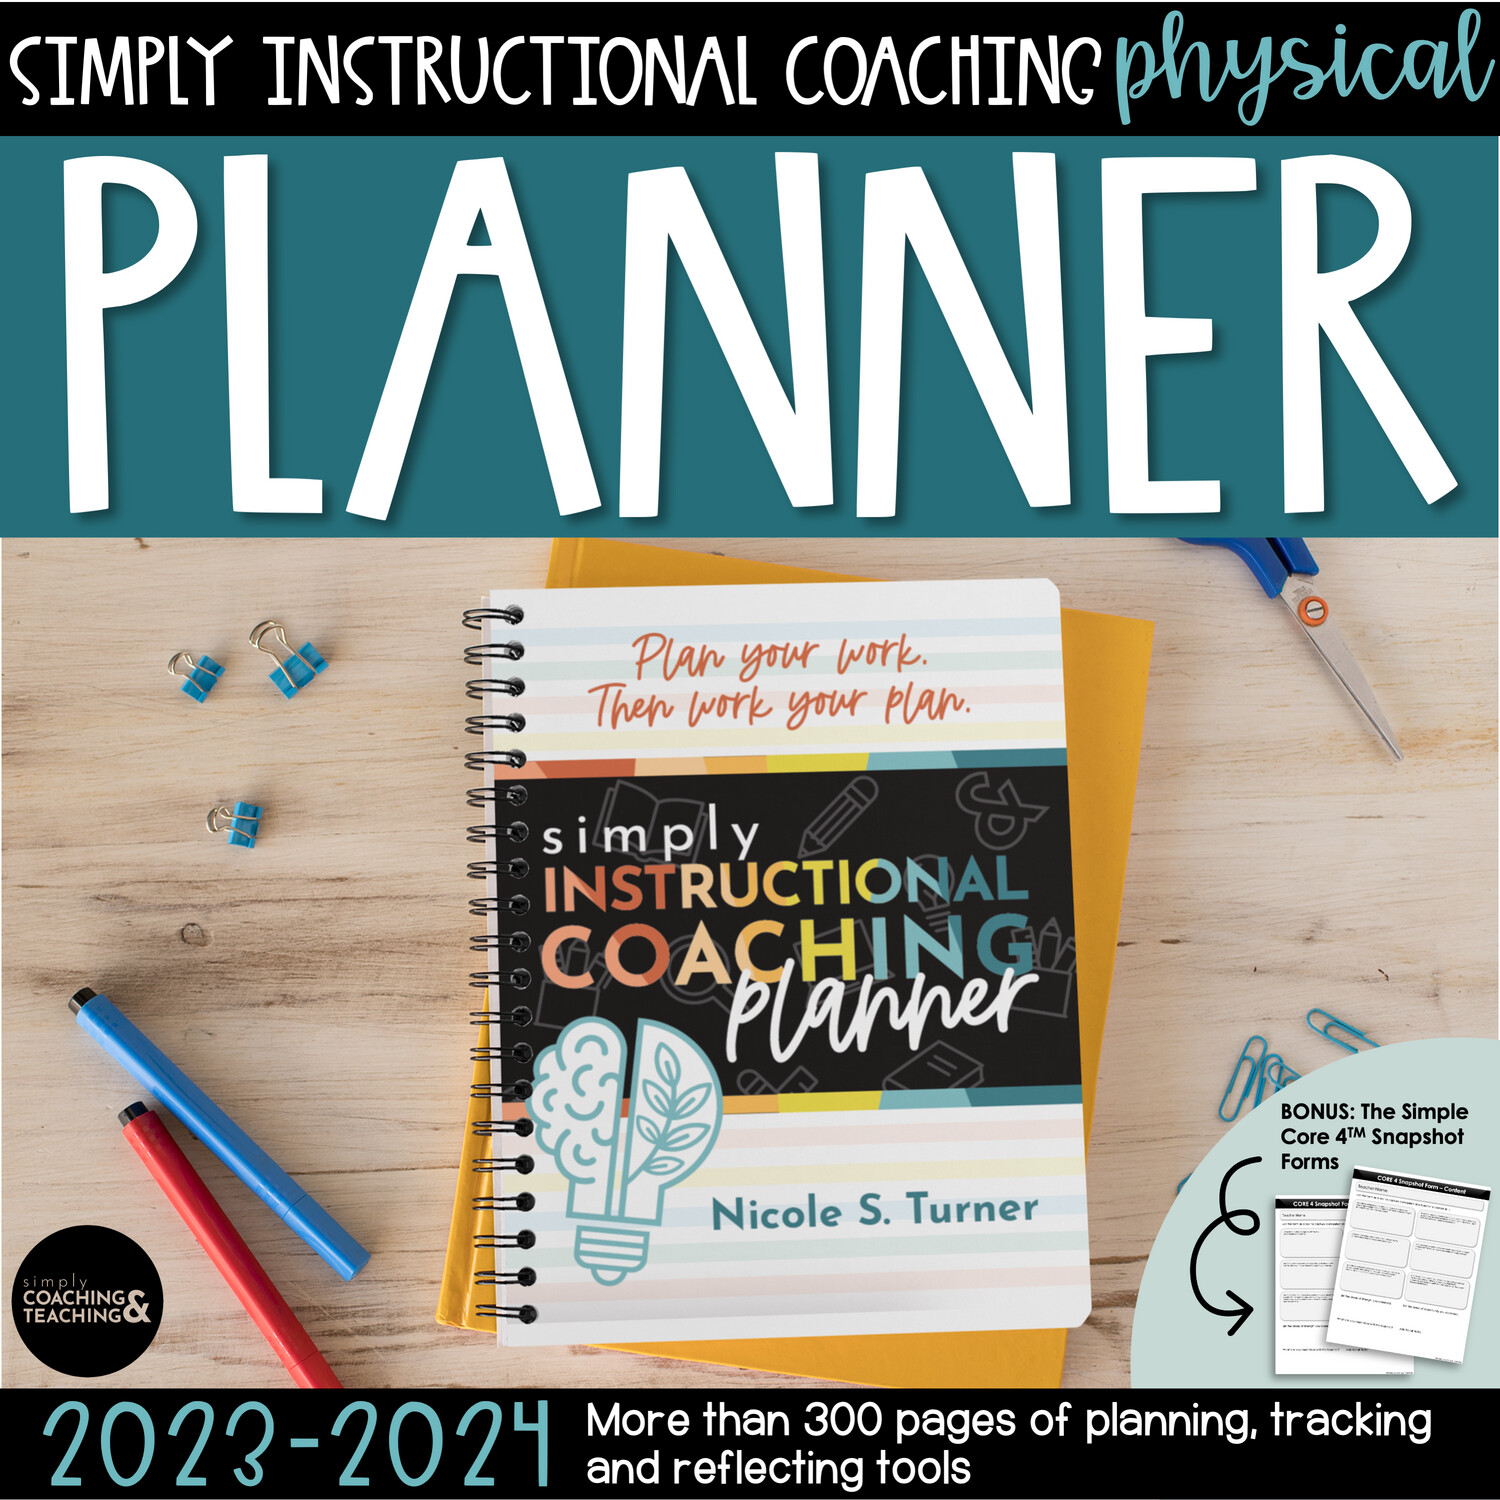 Simply Instructional Coaching 2023 - 2024 Physical Planner